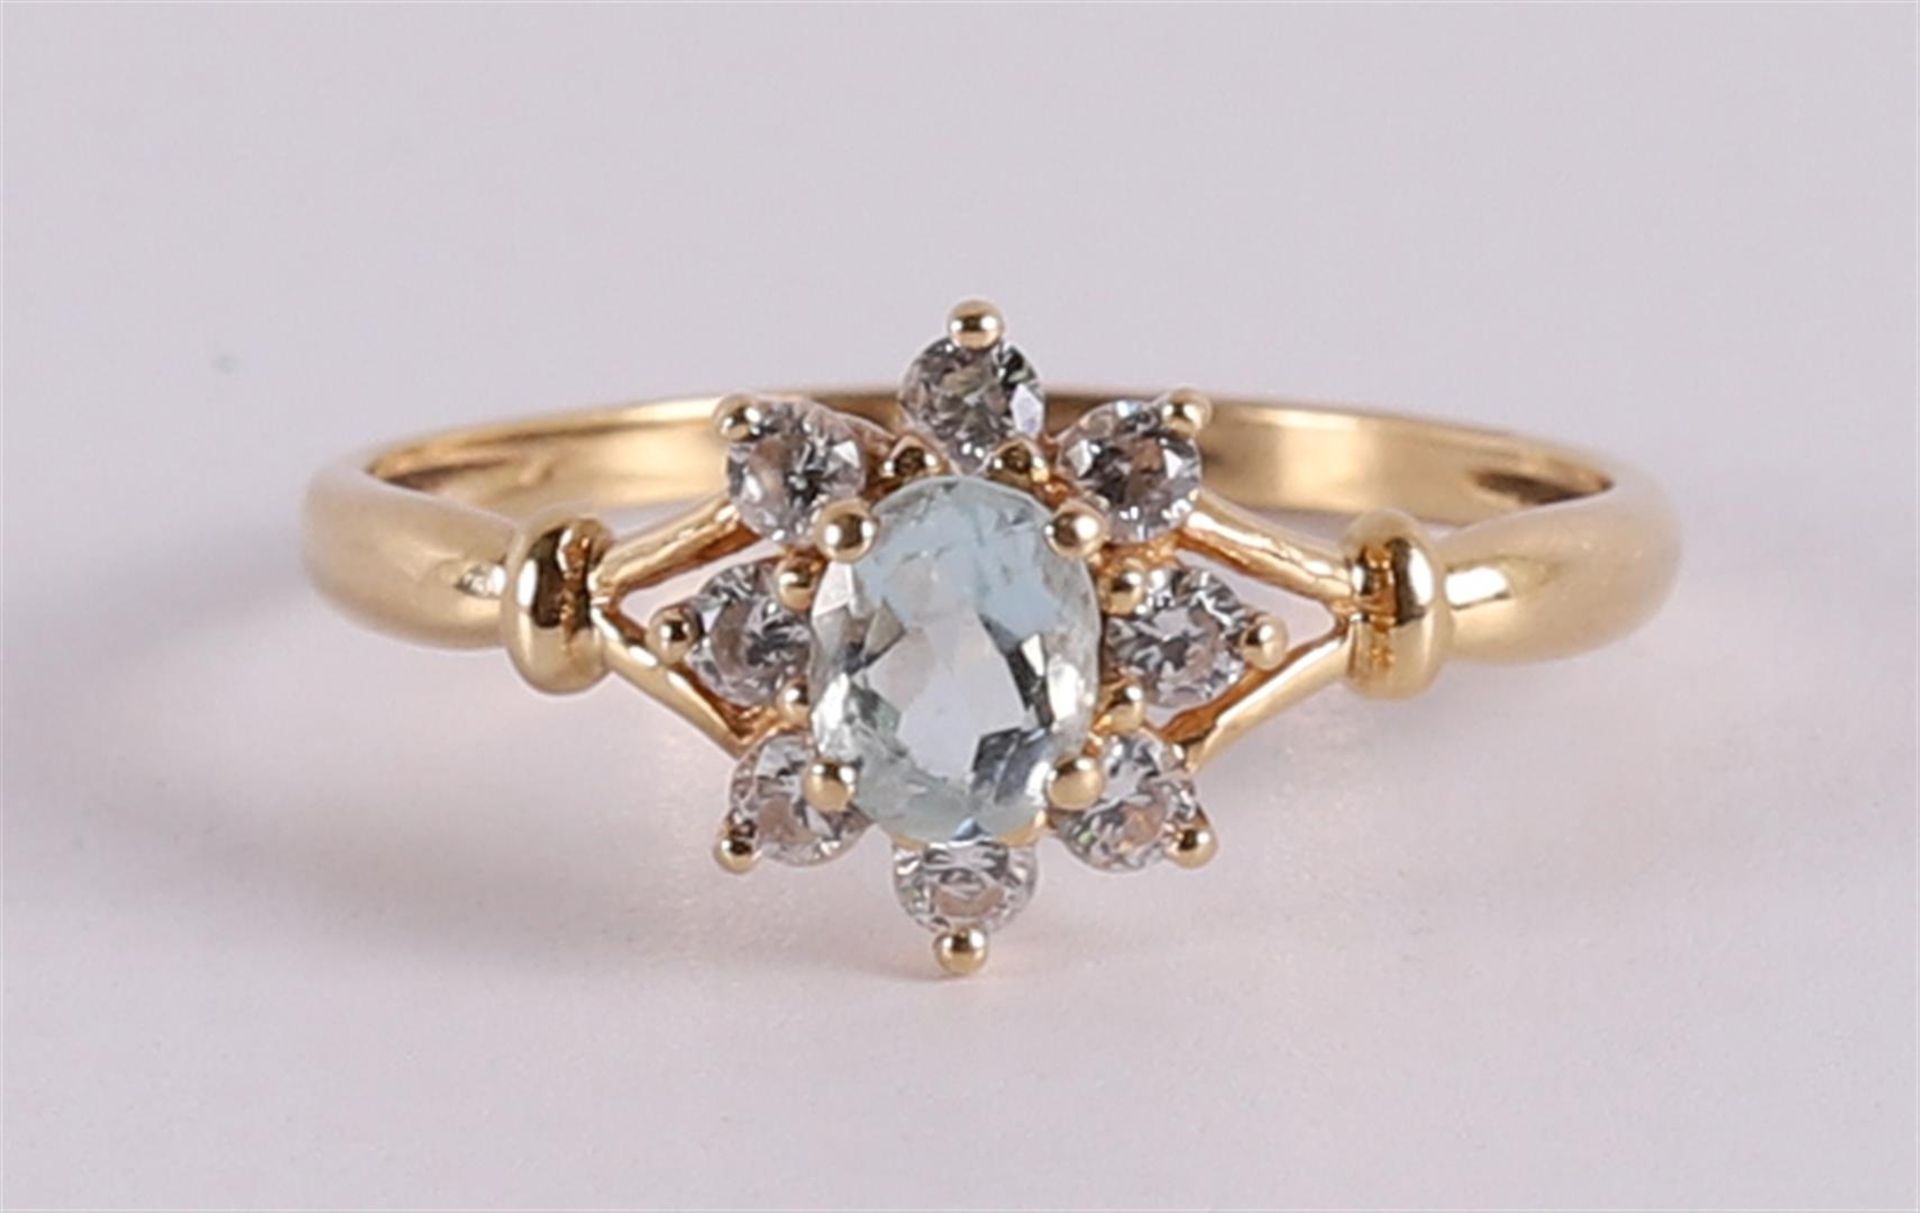 An 18 kt gold entourage ring with an oval aquamarine and zirconias.